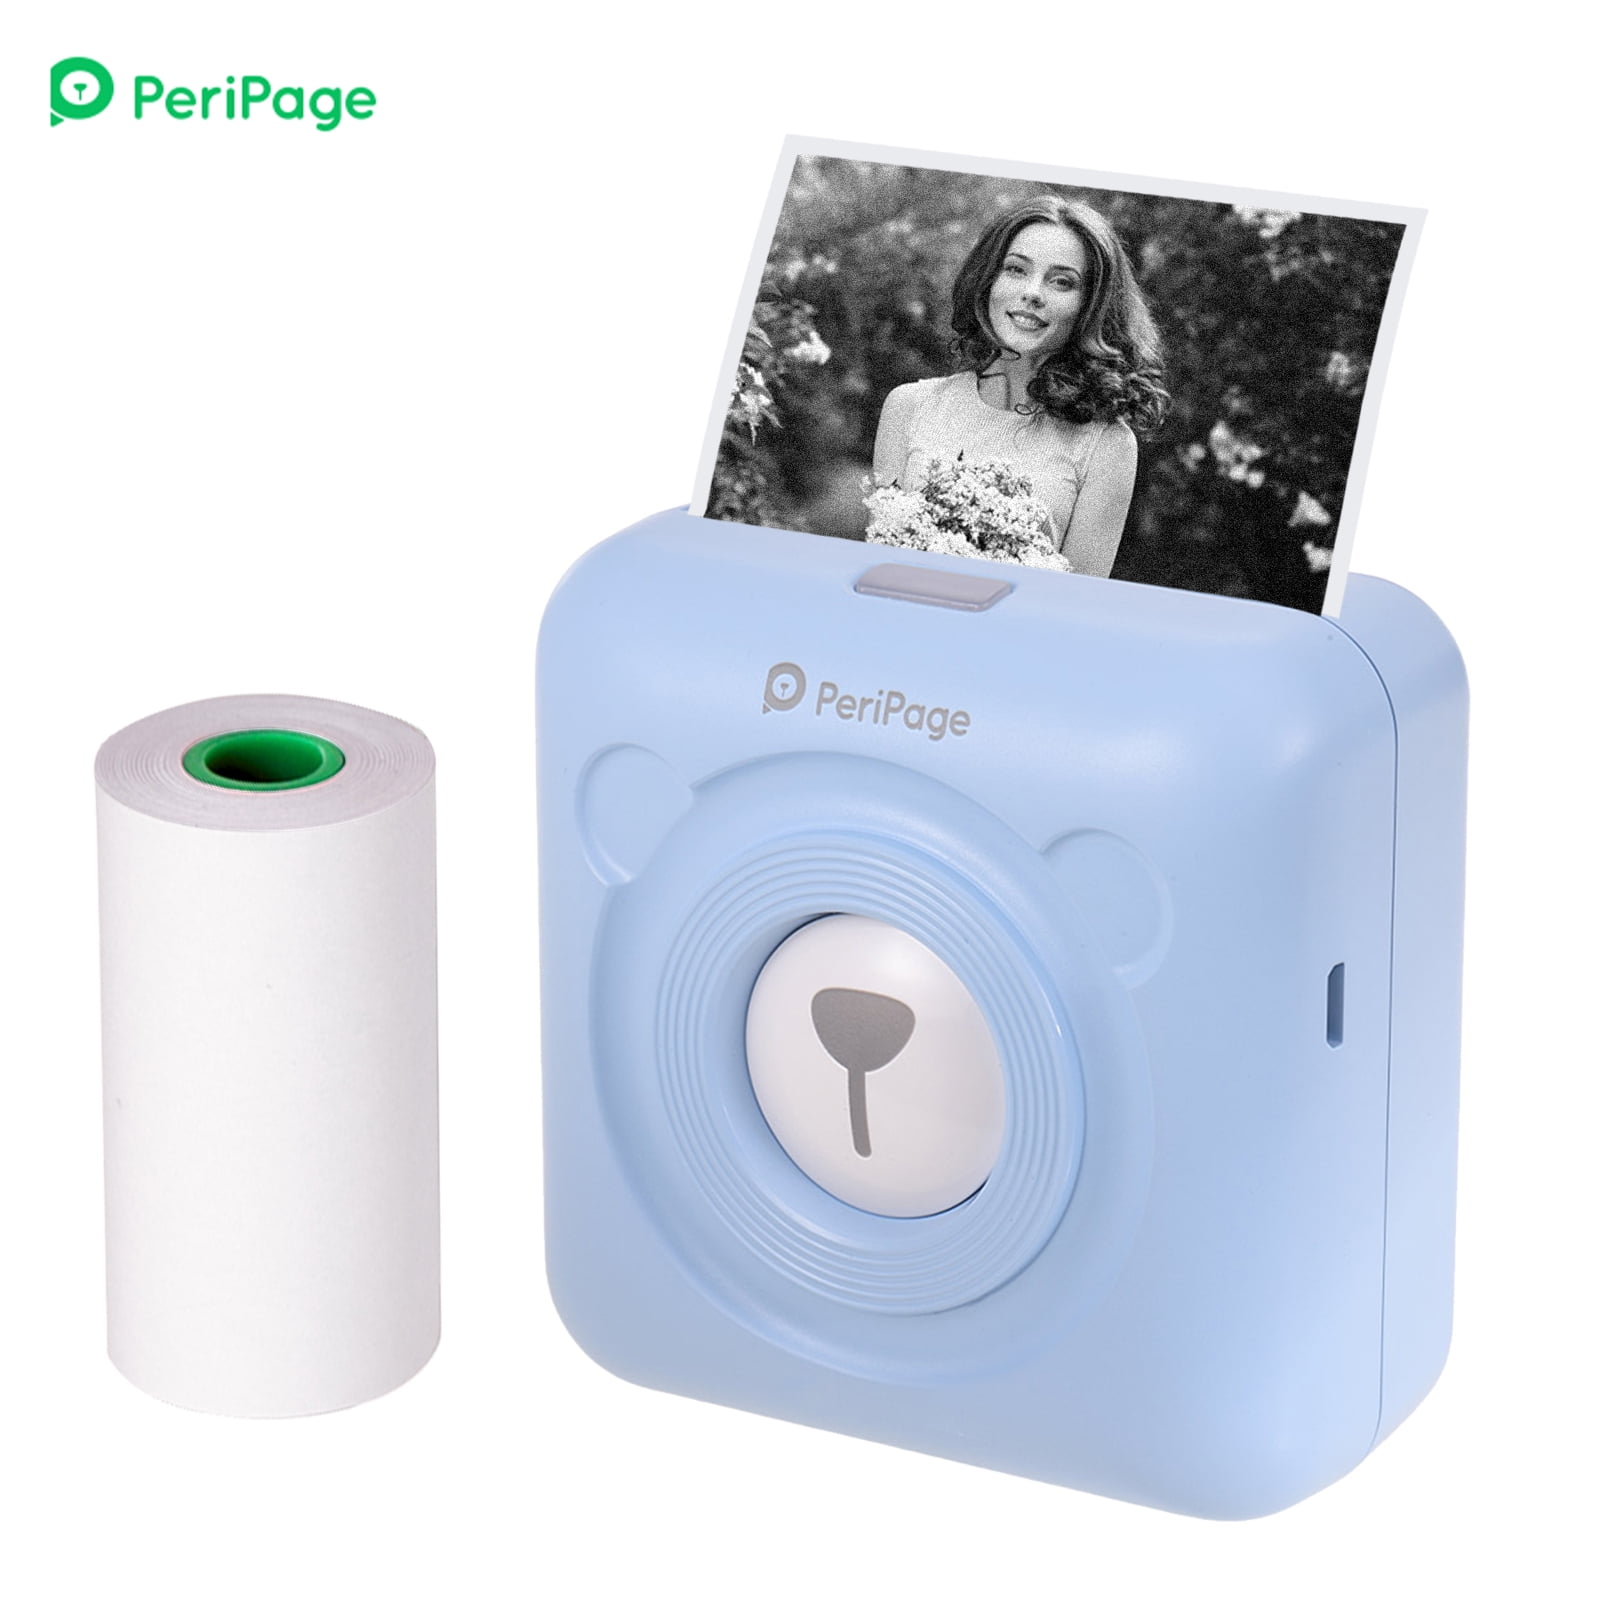 2021 PeriPage Mini Pocket Wireless Thermal Printer,Thermal Portable Bluetooth Photo Printer Picture Photo Label Memo Receipt Paper Printer Cable Support for Android iOS Smartphone Windows 